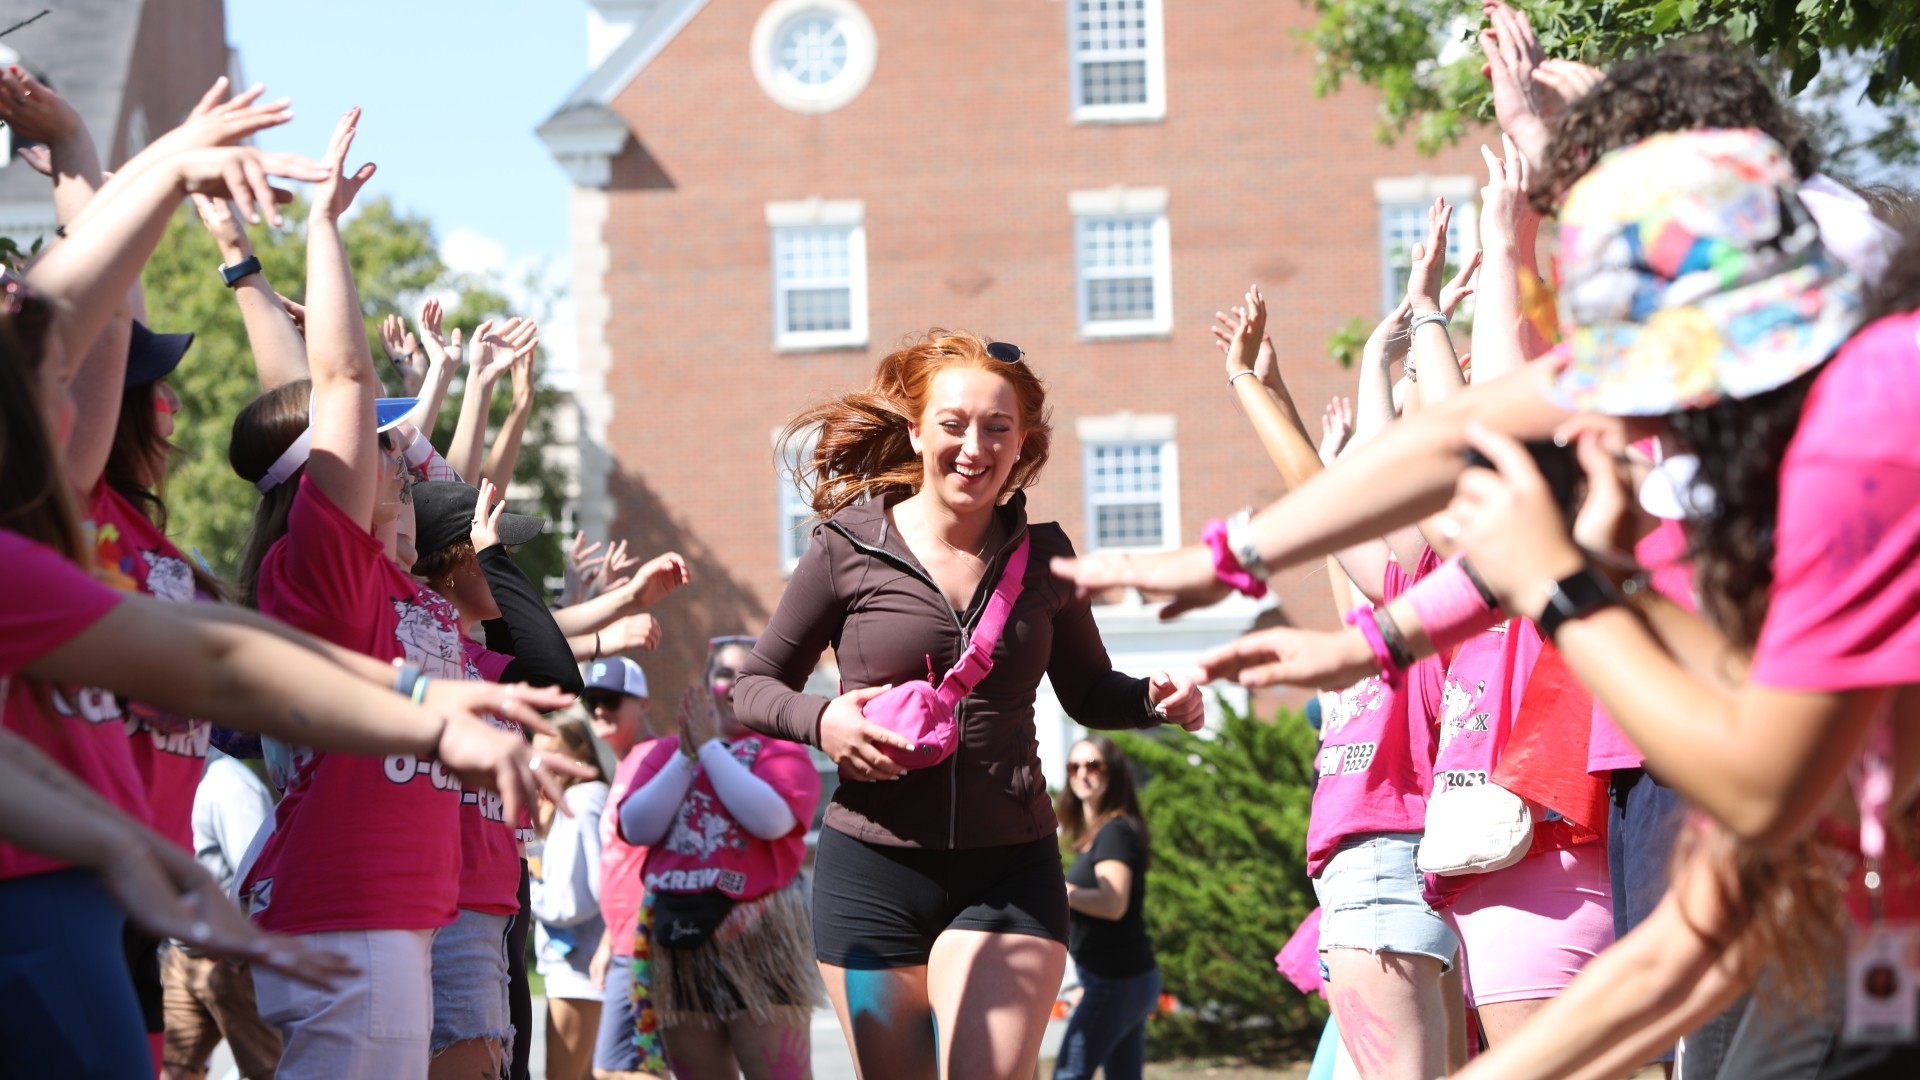 A happy student runs between two lines of cheering people in pink shirts